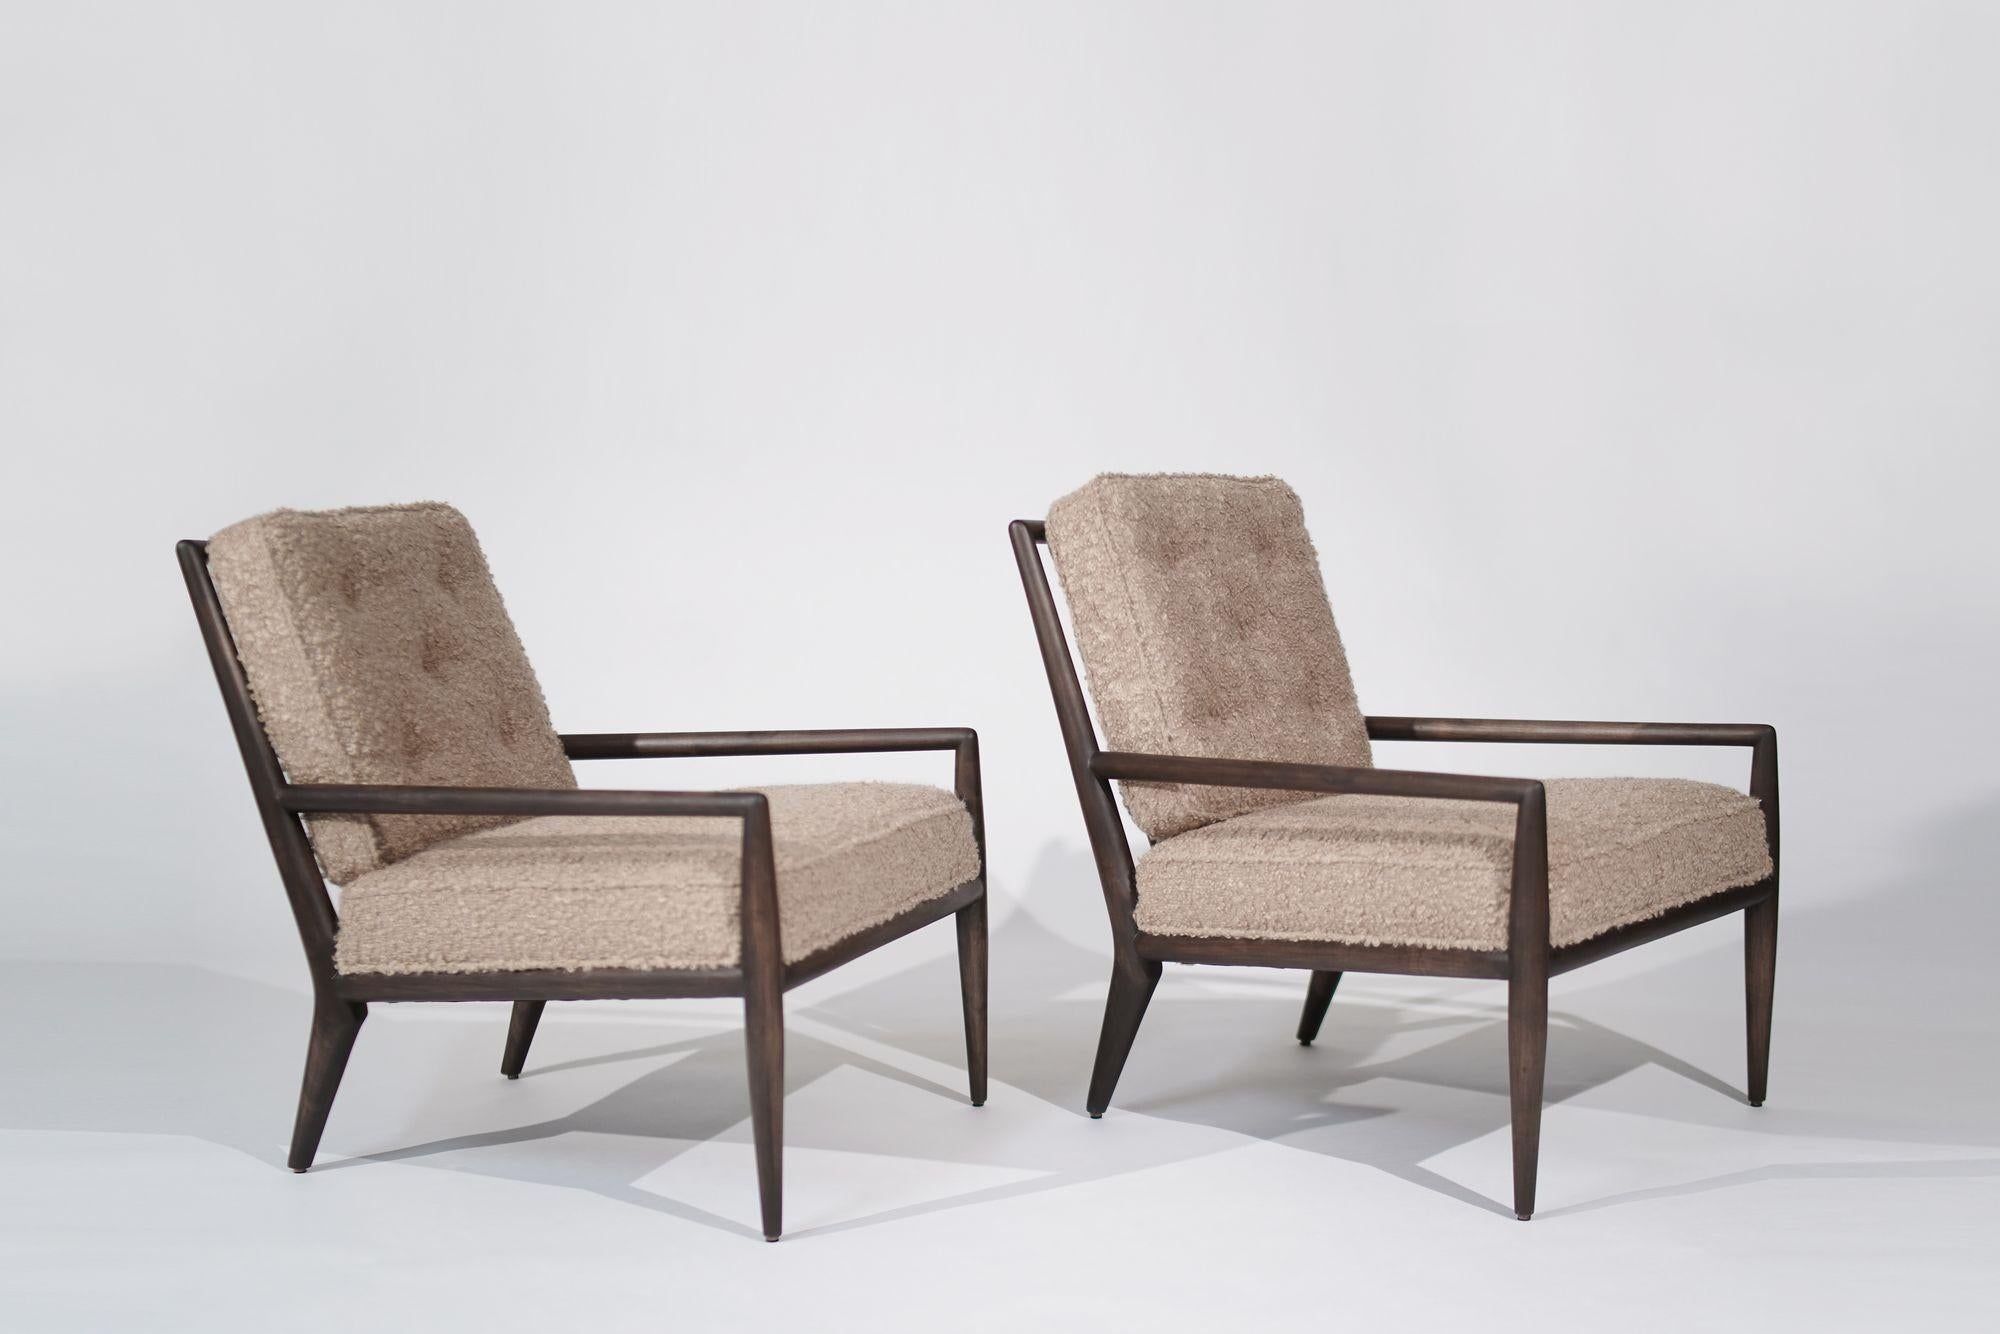 Bouclé Set of Lounge Chairs in Teddy Boucle by T.H. Robsjohn-Gibbings, C. 1950s For Sale